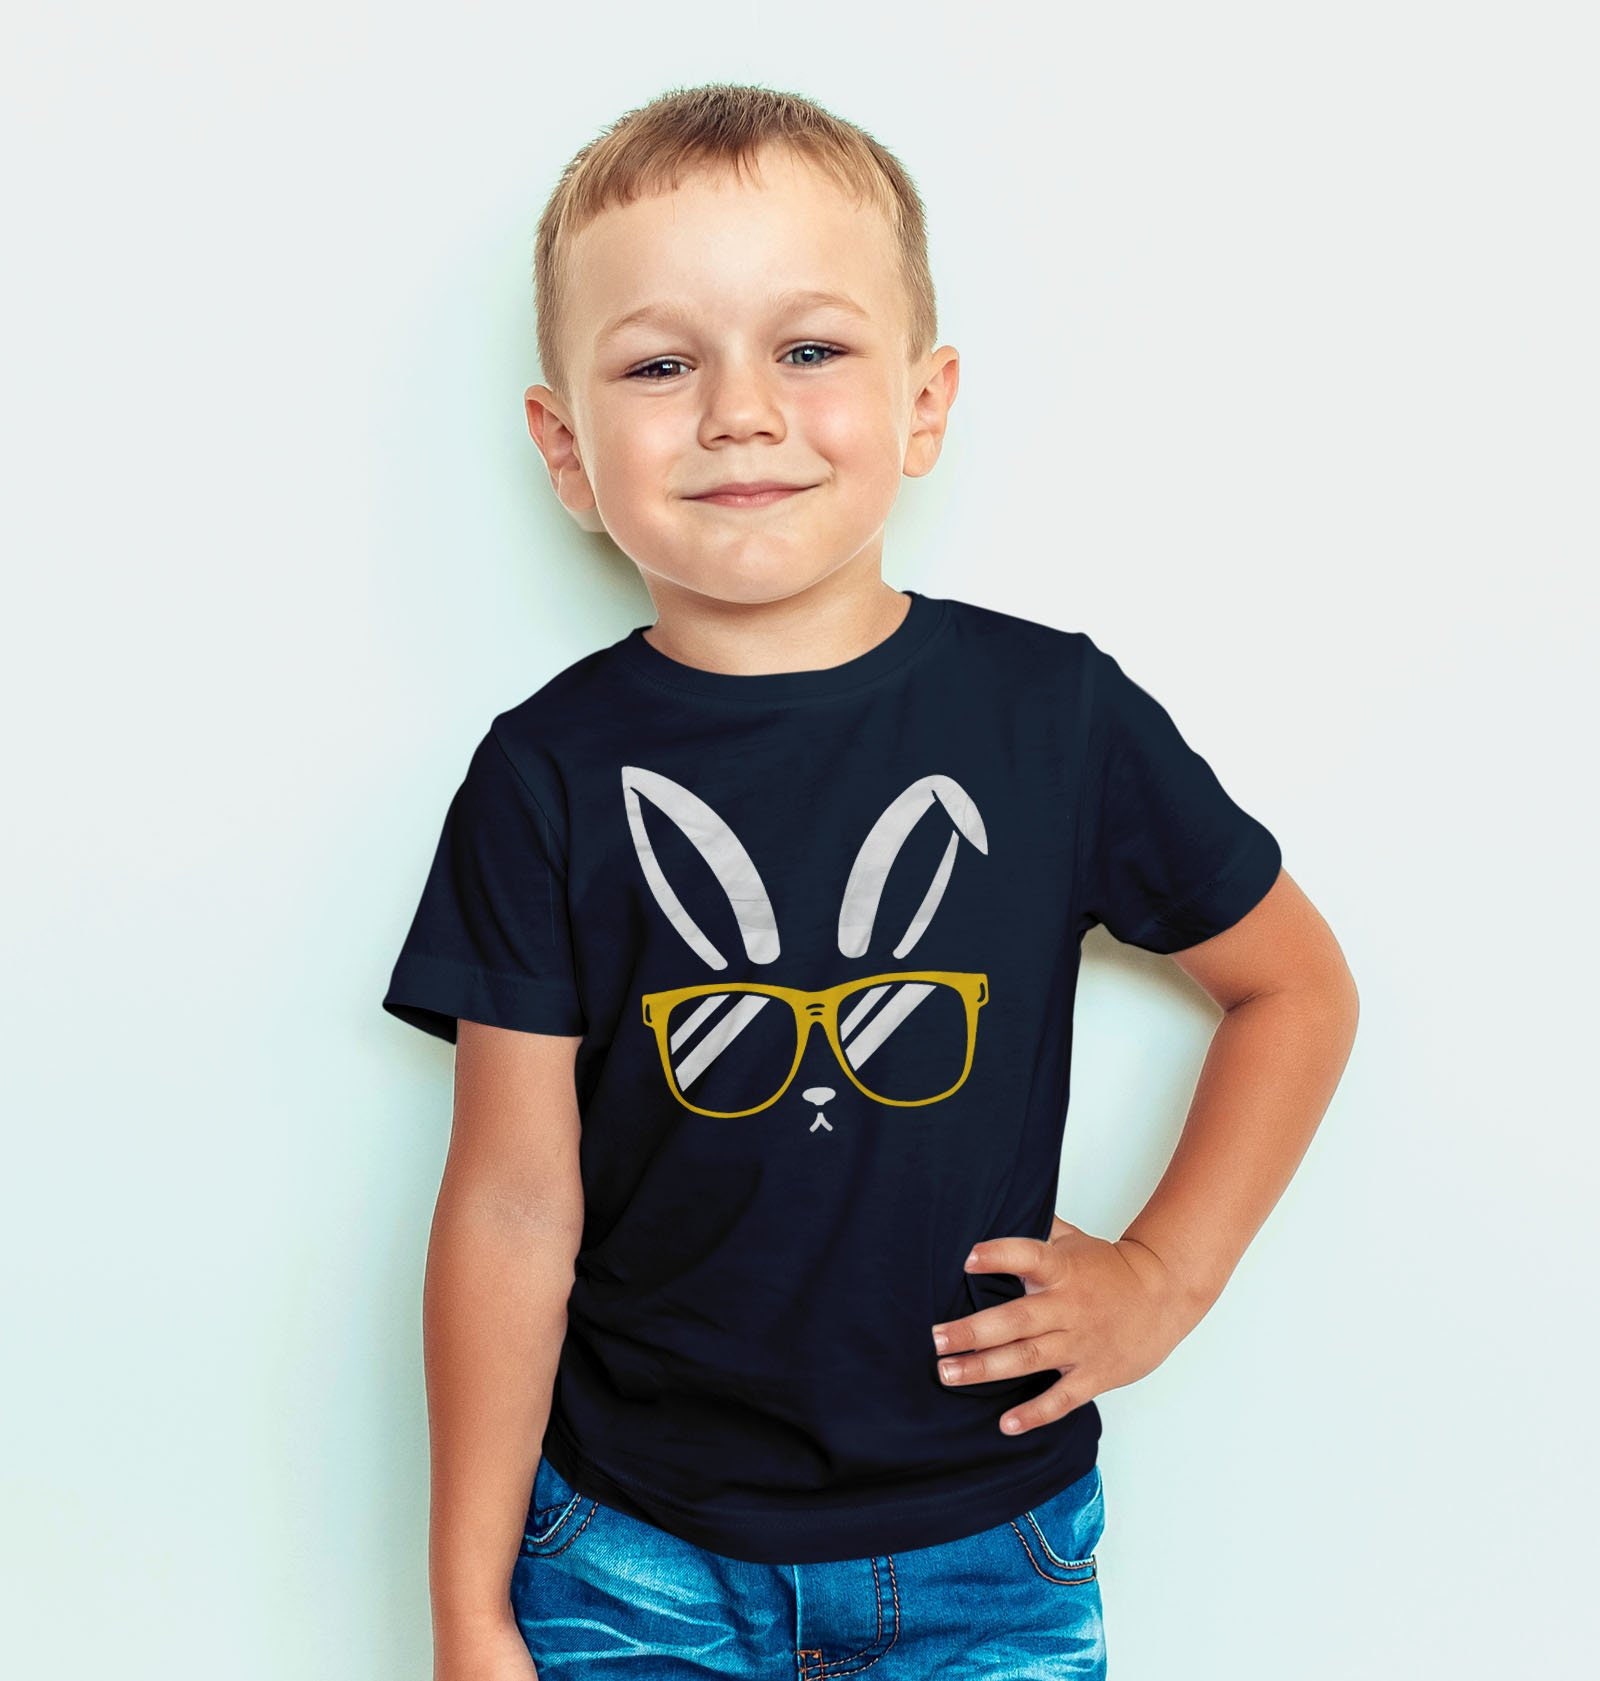 Cute Easter Shirt for Boy or Girl, Bunny Ear T Shirt for Kids Baby or  Toddler, Tshirt Sunglasses Rabbit, Hipster Kids Clothes, Funny T-shirt 